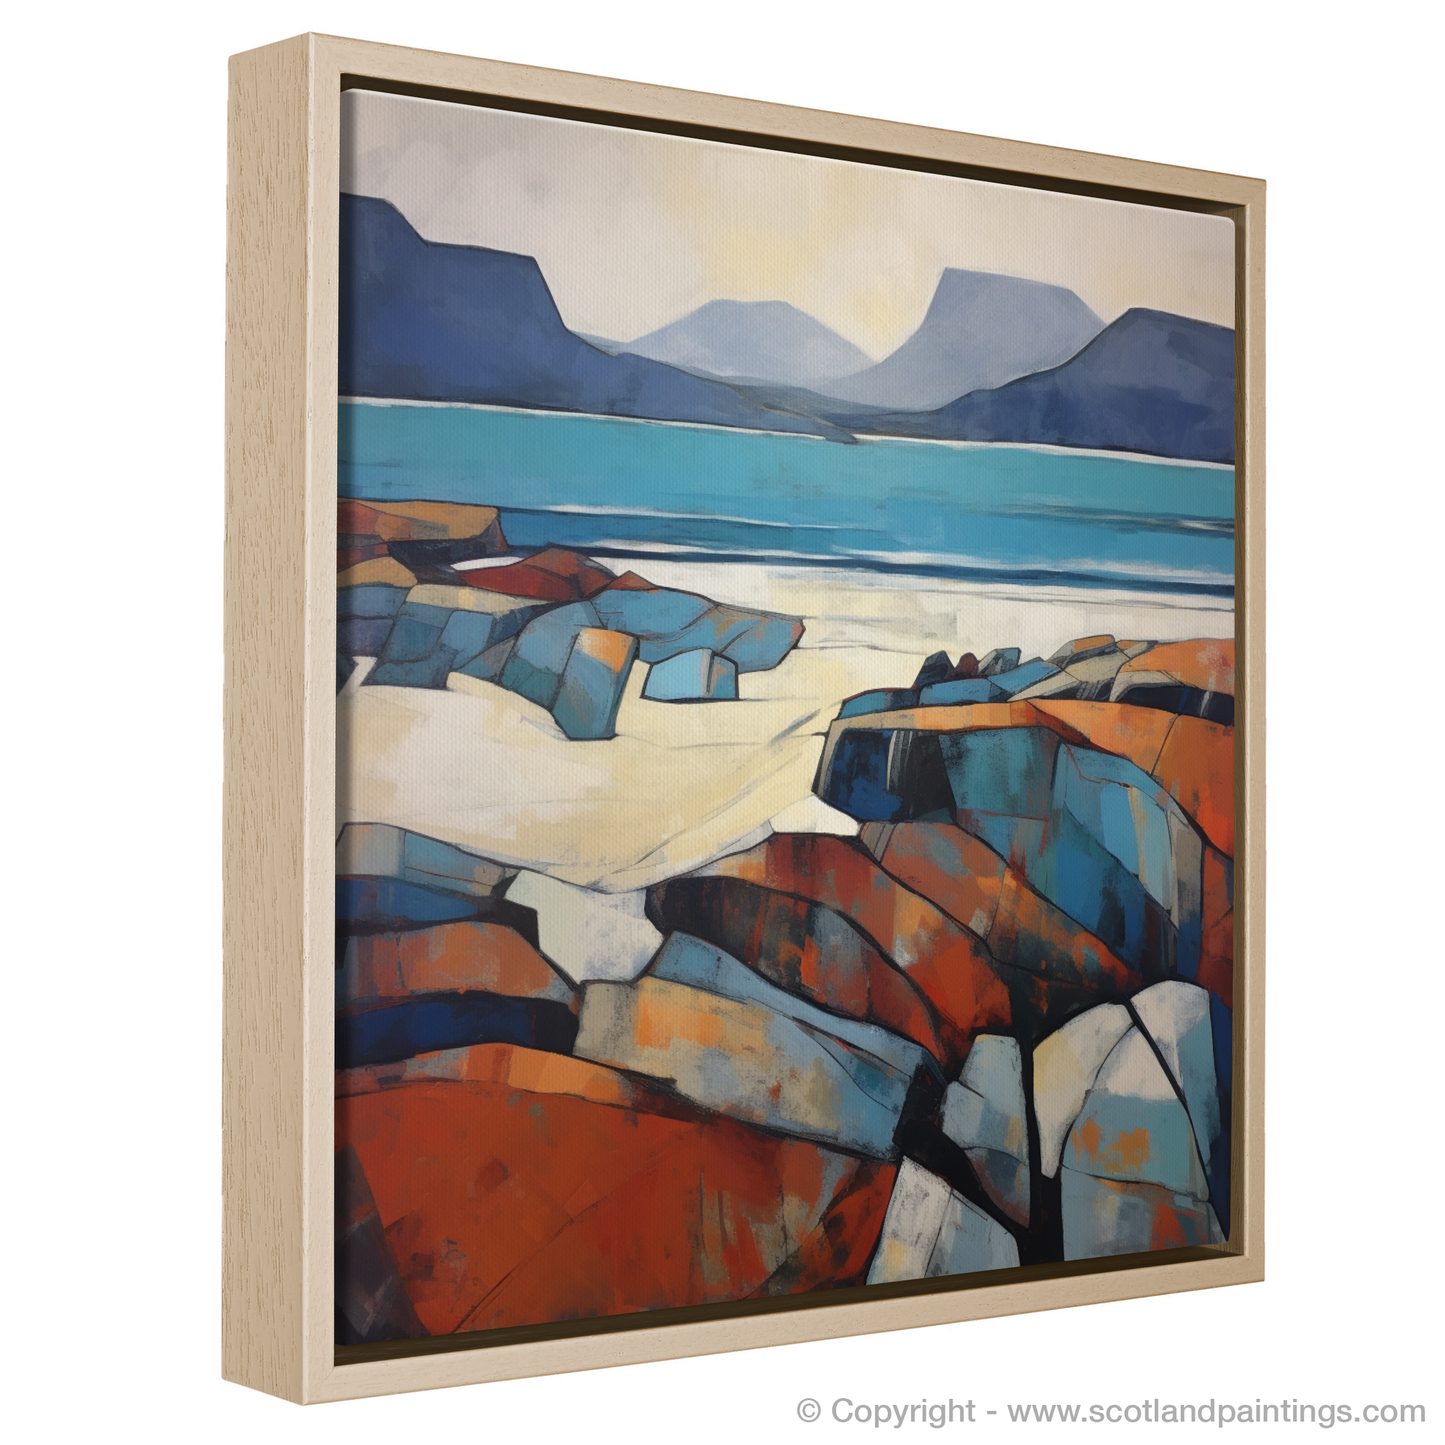 Painting and Art Print of Mellon Udrigle Beach, Wester Ross entitled "Mellon Udrigle Mosaic: An Abstract Ode to Scottish Coves".